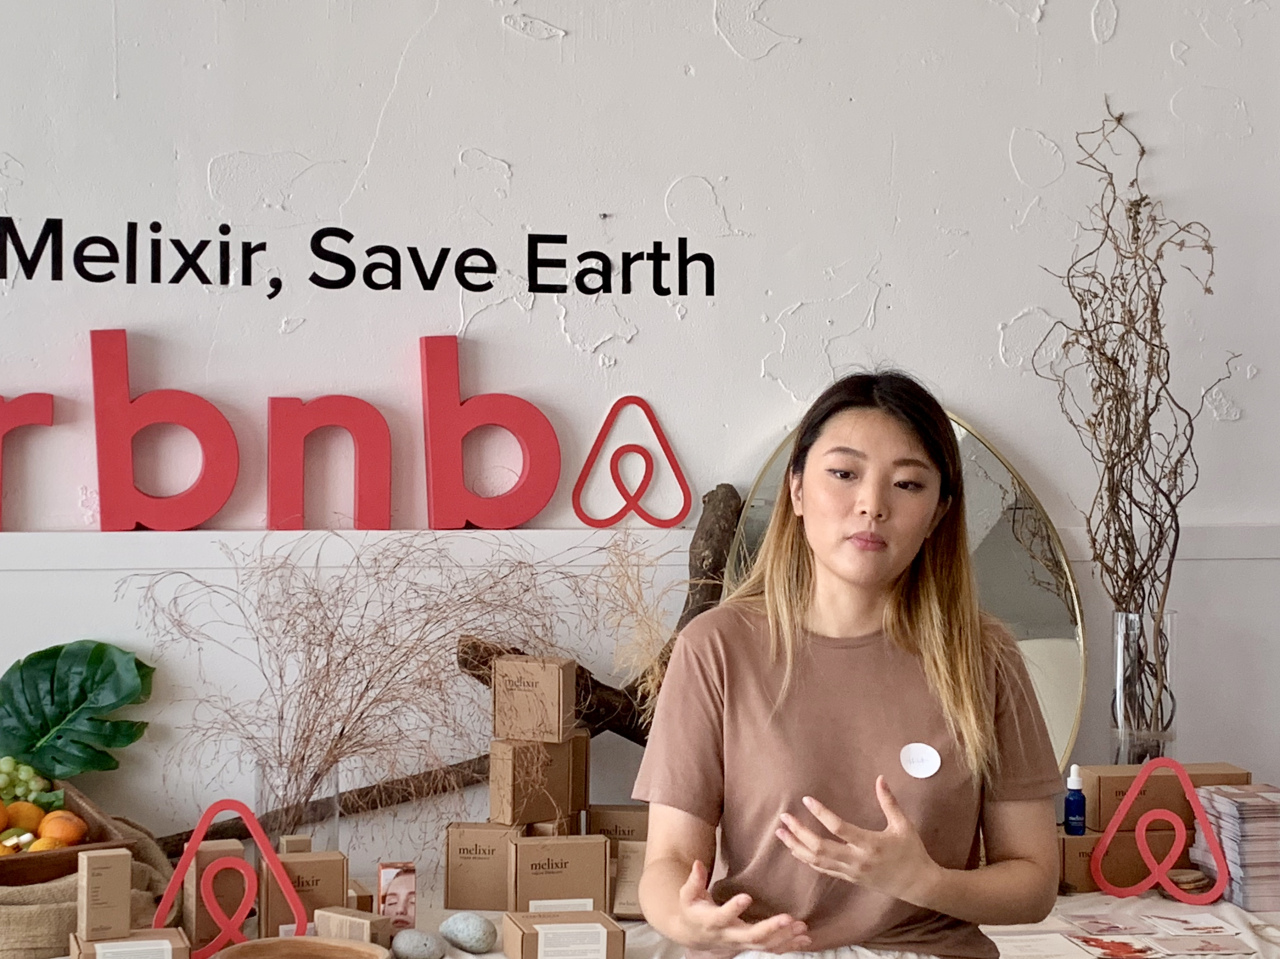 Lee Ha-na, founder and CEO of vegan skin care brand Melixir, speaks during a press event arranged by Airbnb on Aug. 16 at the brand’s showroom in Itaewon, central Seoul. (Im Eun-byel/The Korea Herald)